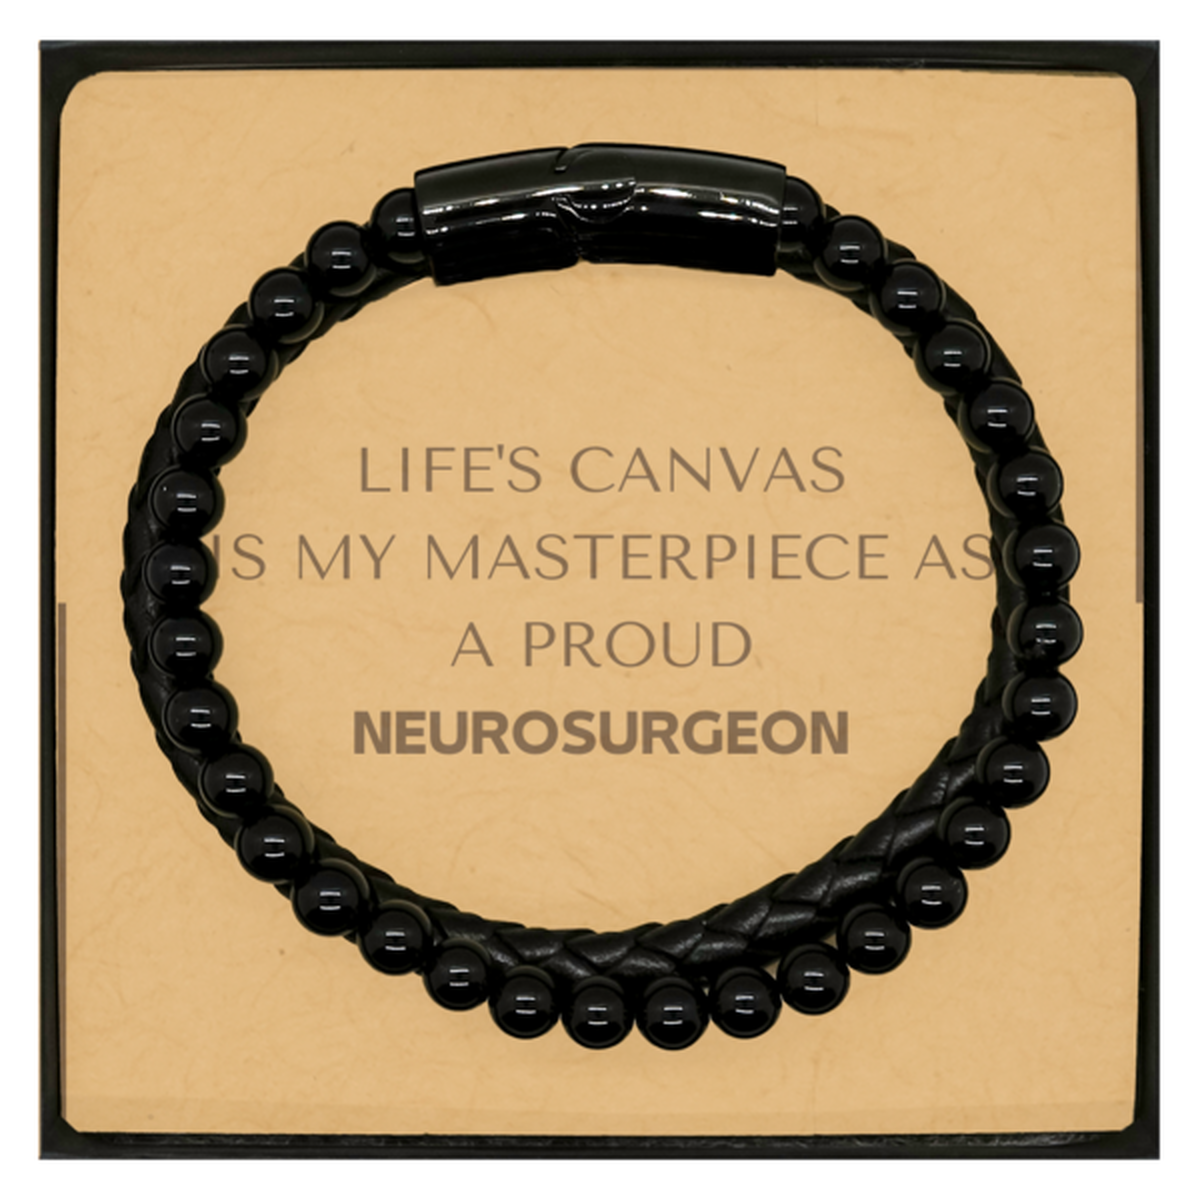 Proud Neurosurgeon Gifts, Life's canvas is my masterpiece, Epic Birthday Christmas Unique Stone Leather Bracelets For Neurosurgeon, Coworkers, Men, Women, Friends